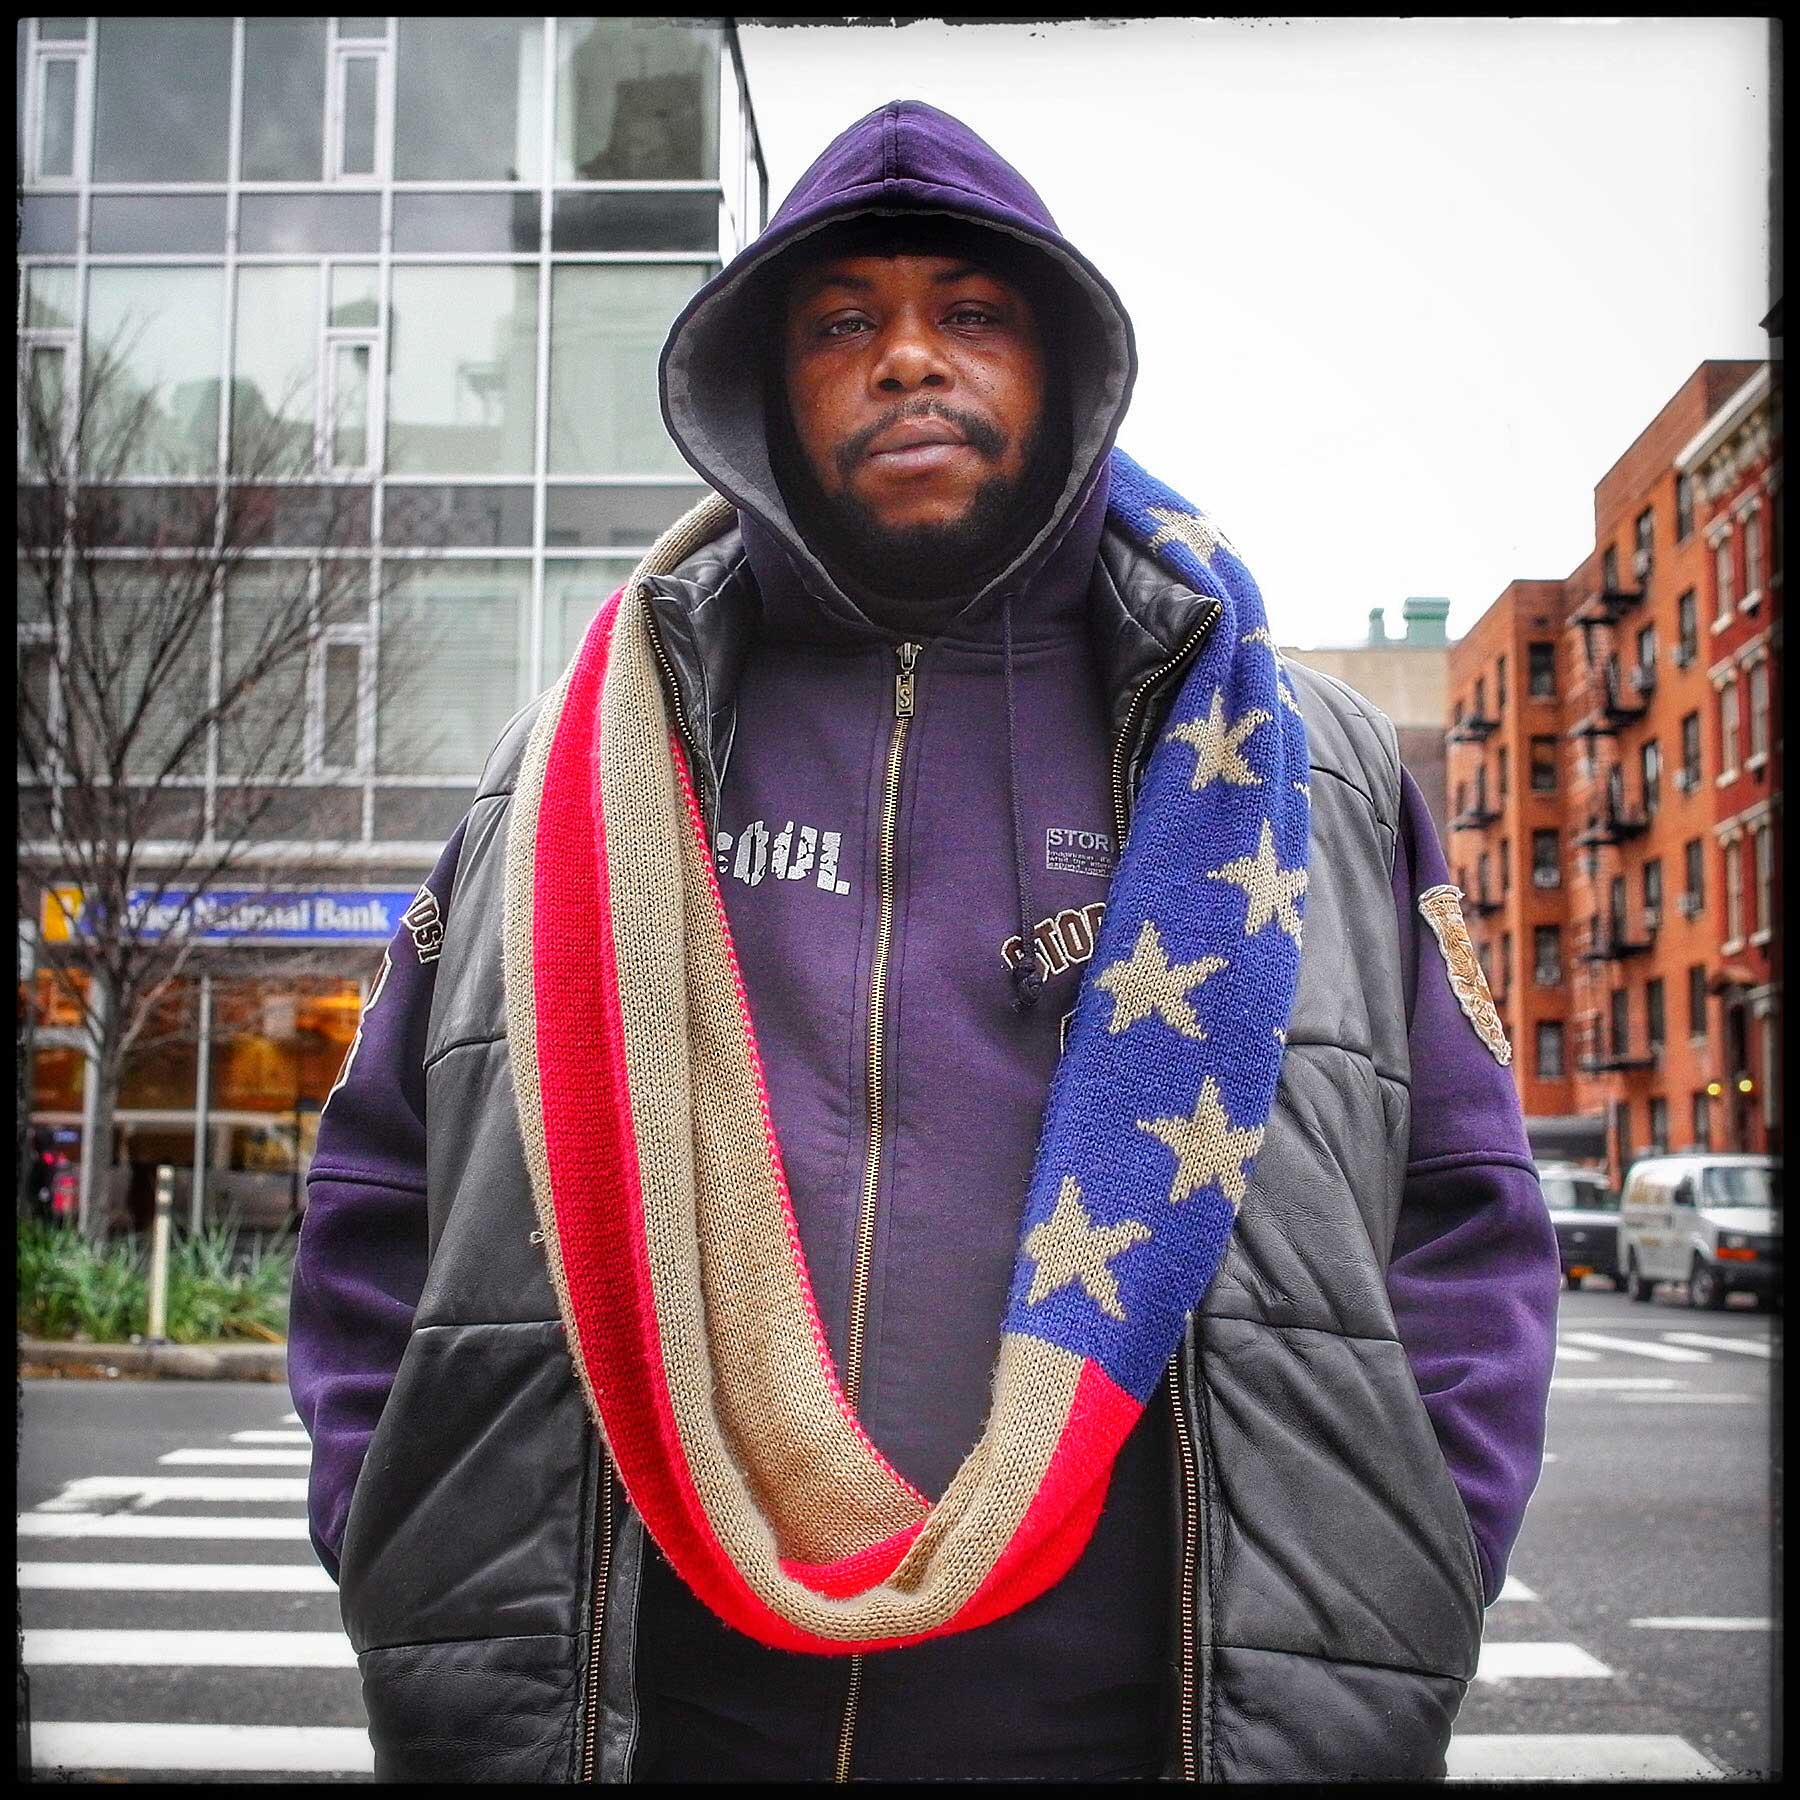 The flag project was one born out of my need to find out why if blacks have been treated so poorly historically in this country, why do they wear the flag. The man I met on the streets of Manhattan said that "This is my country, I was born here. I am a proud American."